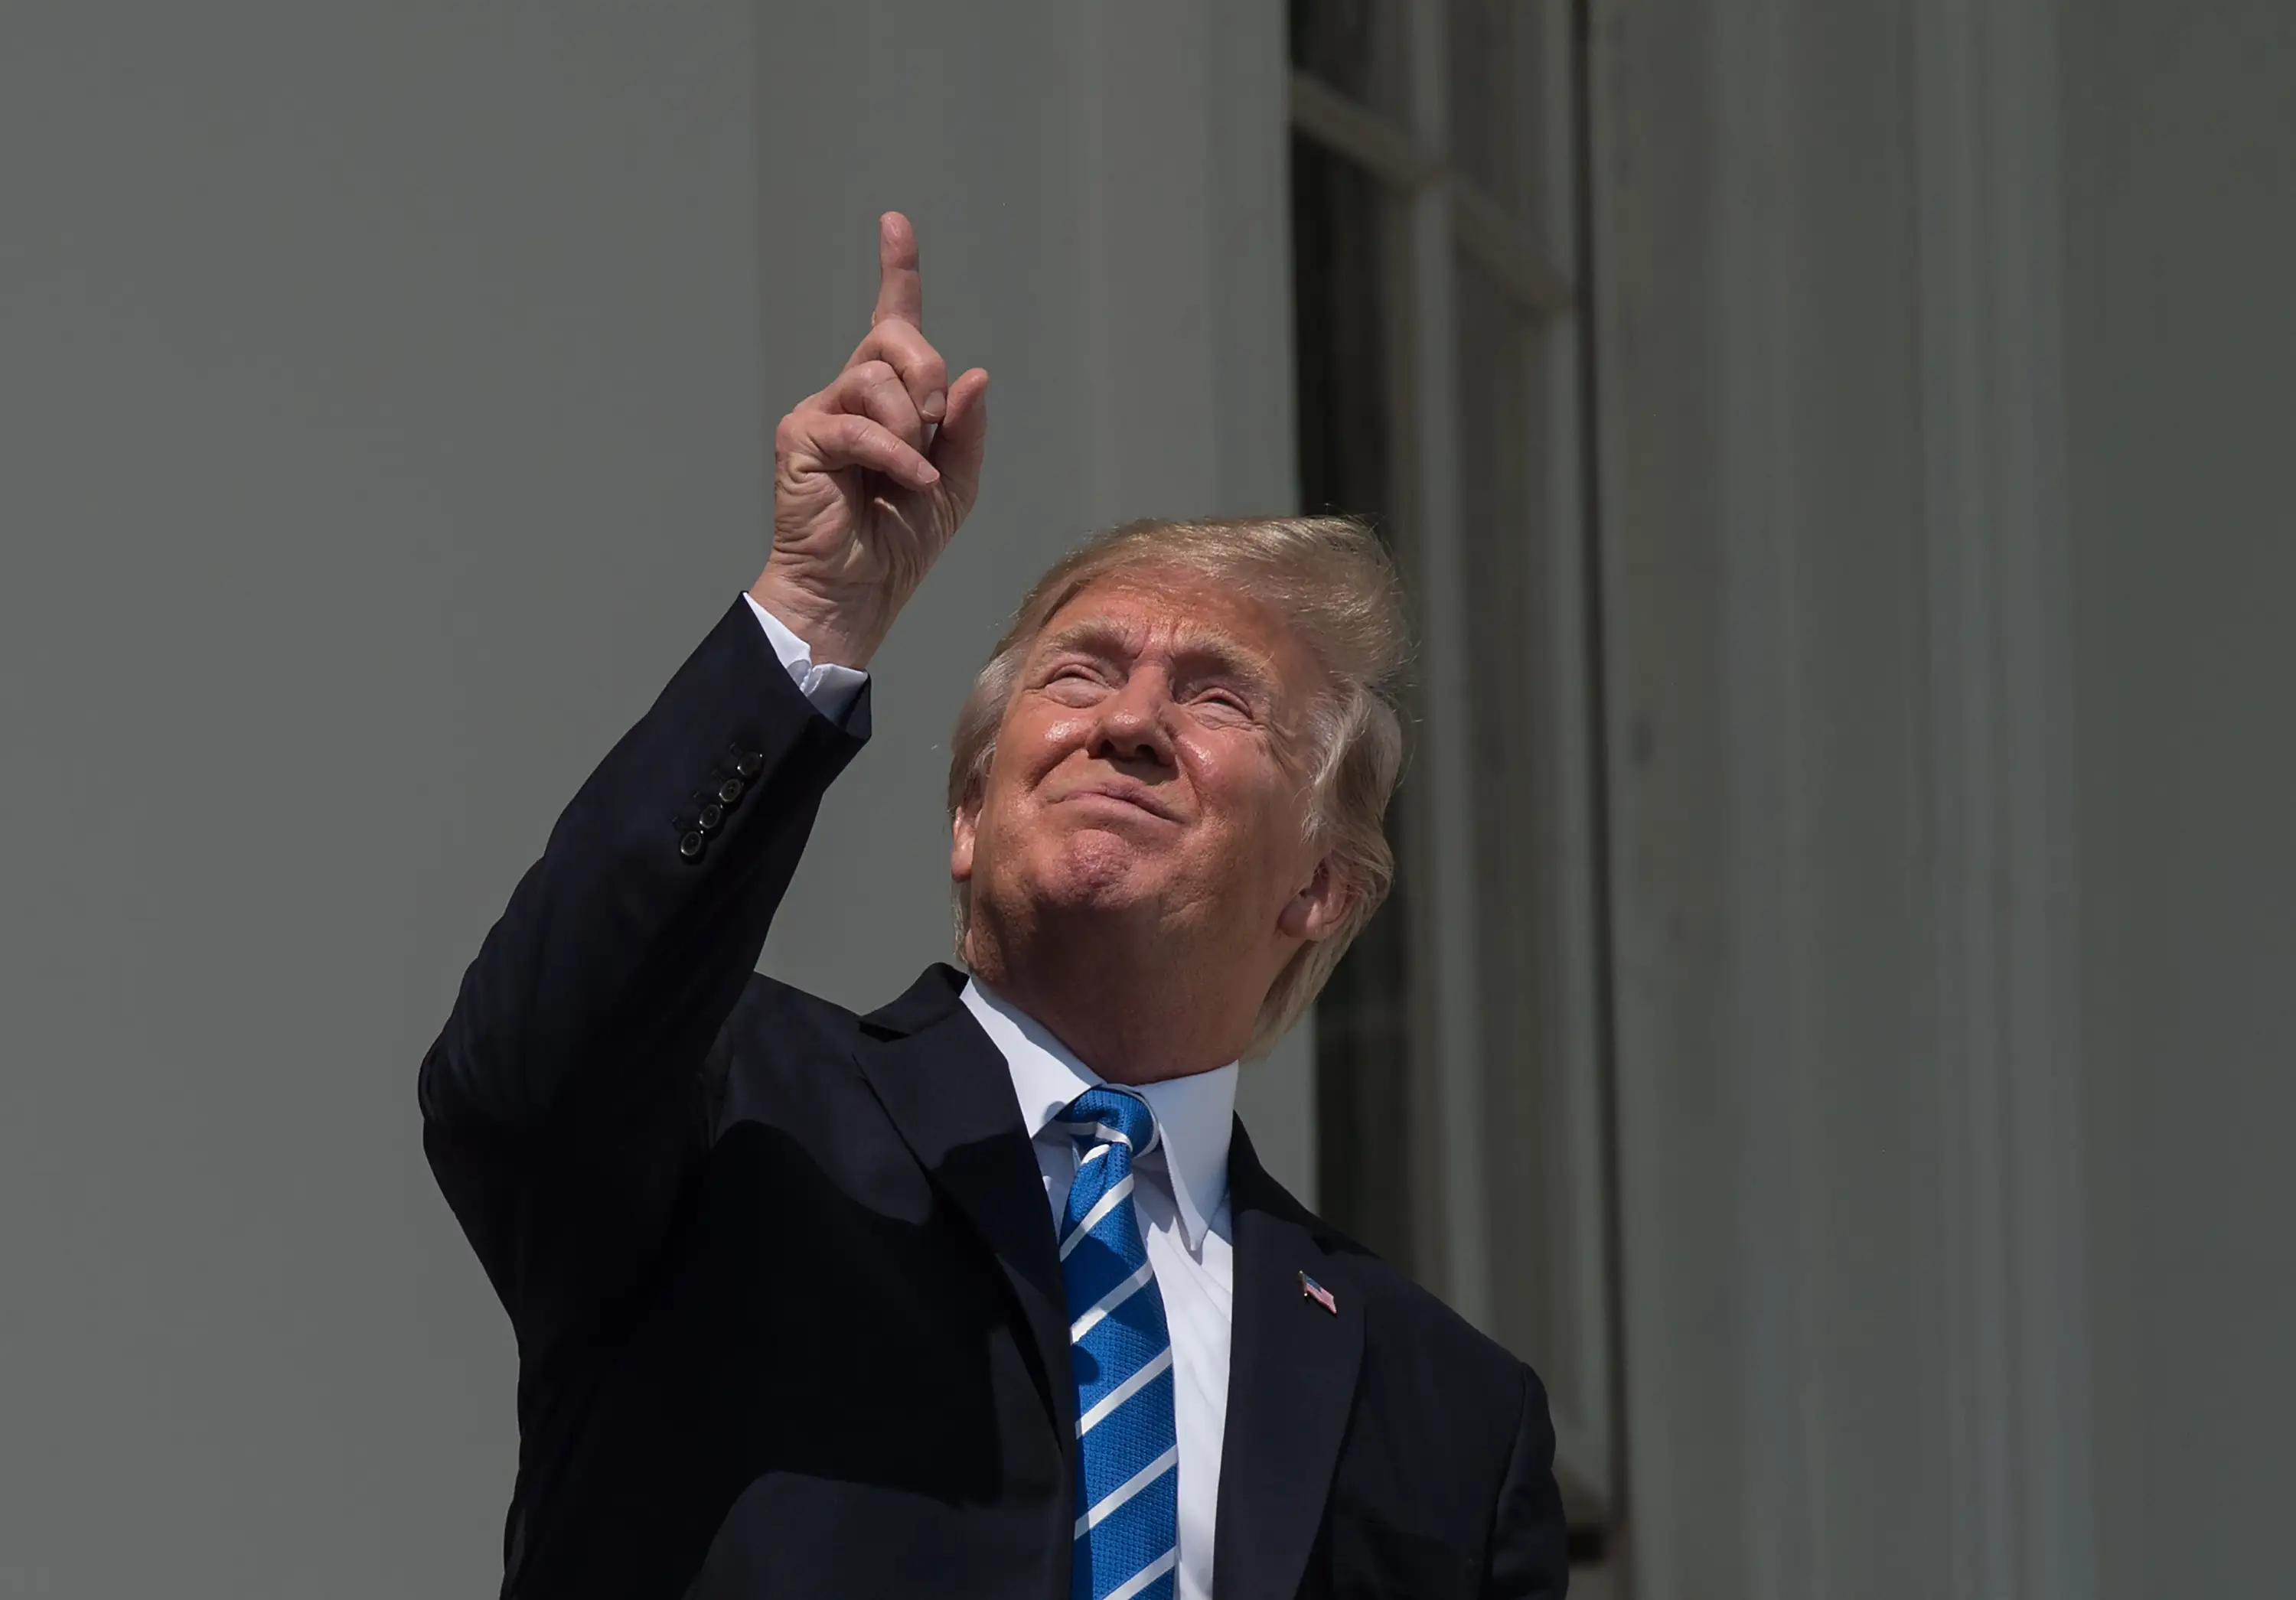 Trump staring at eclipse without glasses